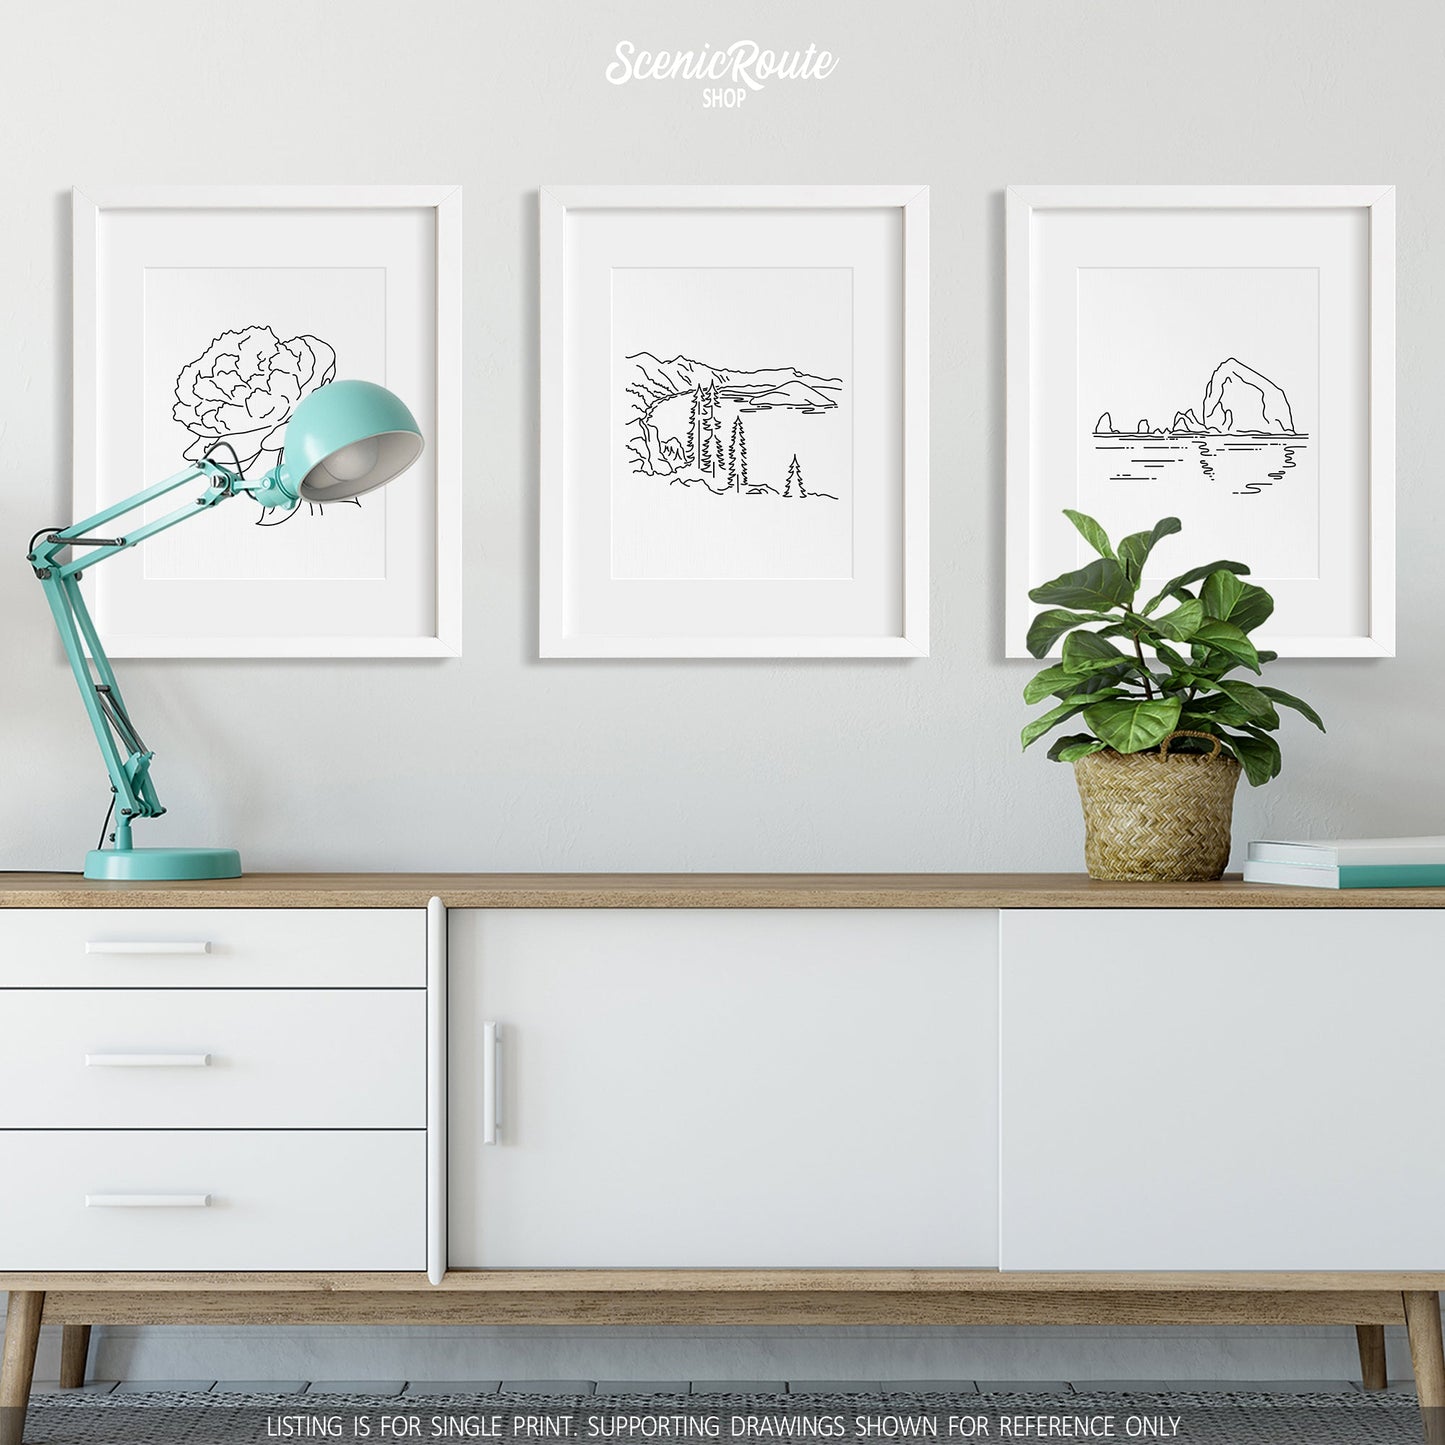 A group of three framed drawings on a wall hanging above a credenza with a lamp and a potted plant. The line art drawings include a Peony Flower, Crater Lake National Park, and Haystack Rock